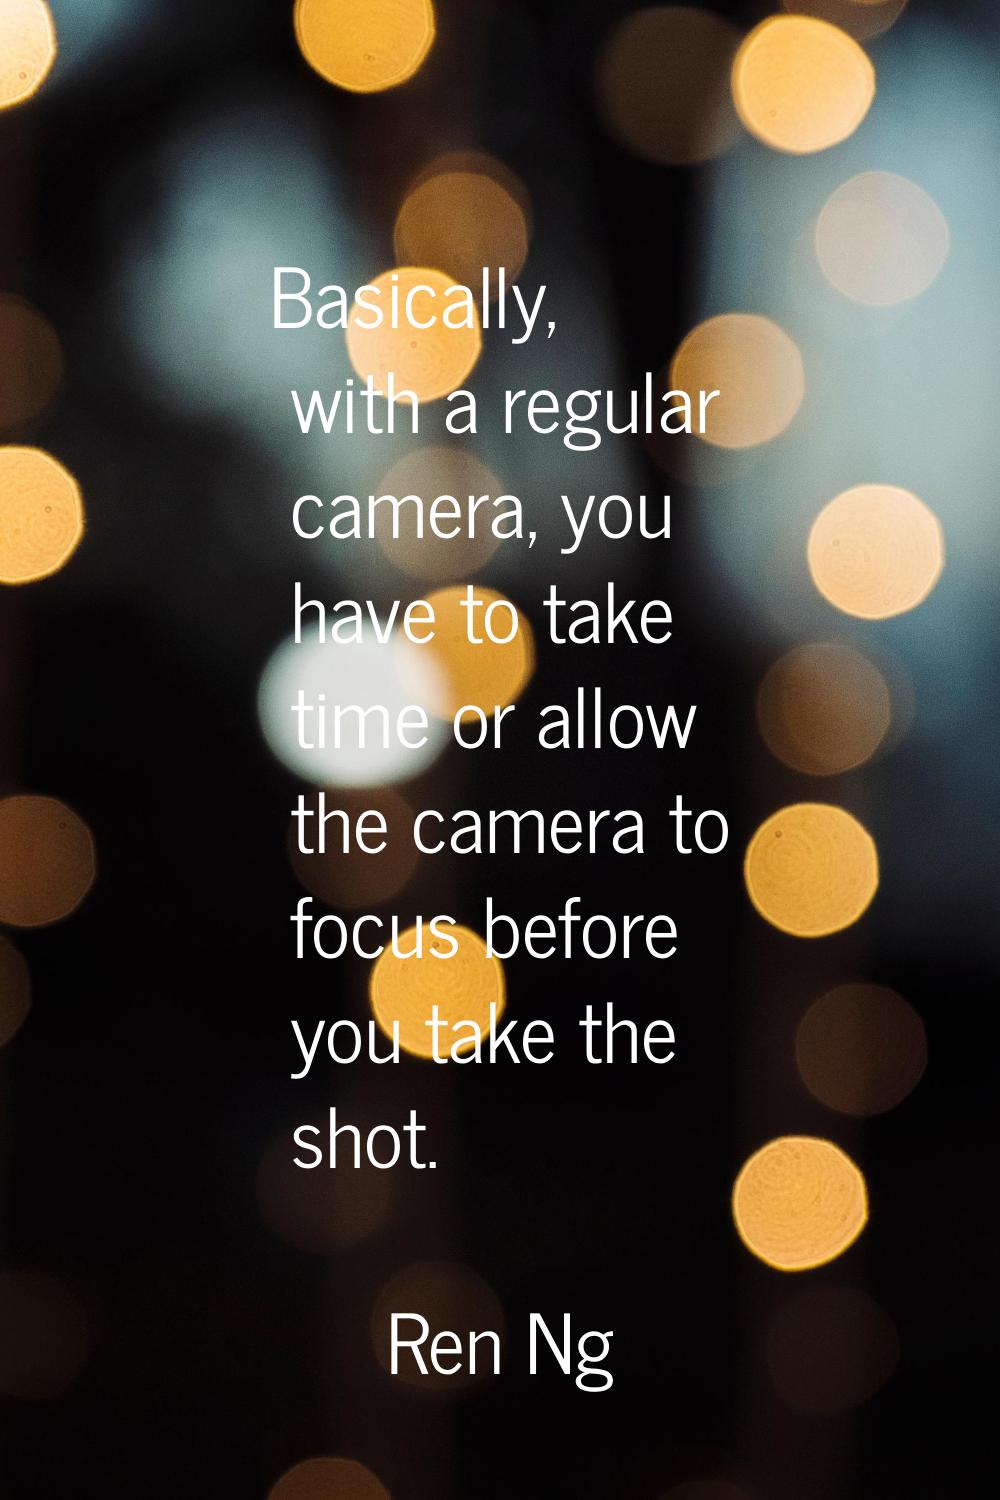 Basically, with a regular camera, you have to take time or allow the camera to focus before you tak